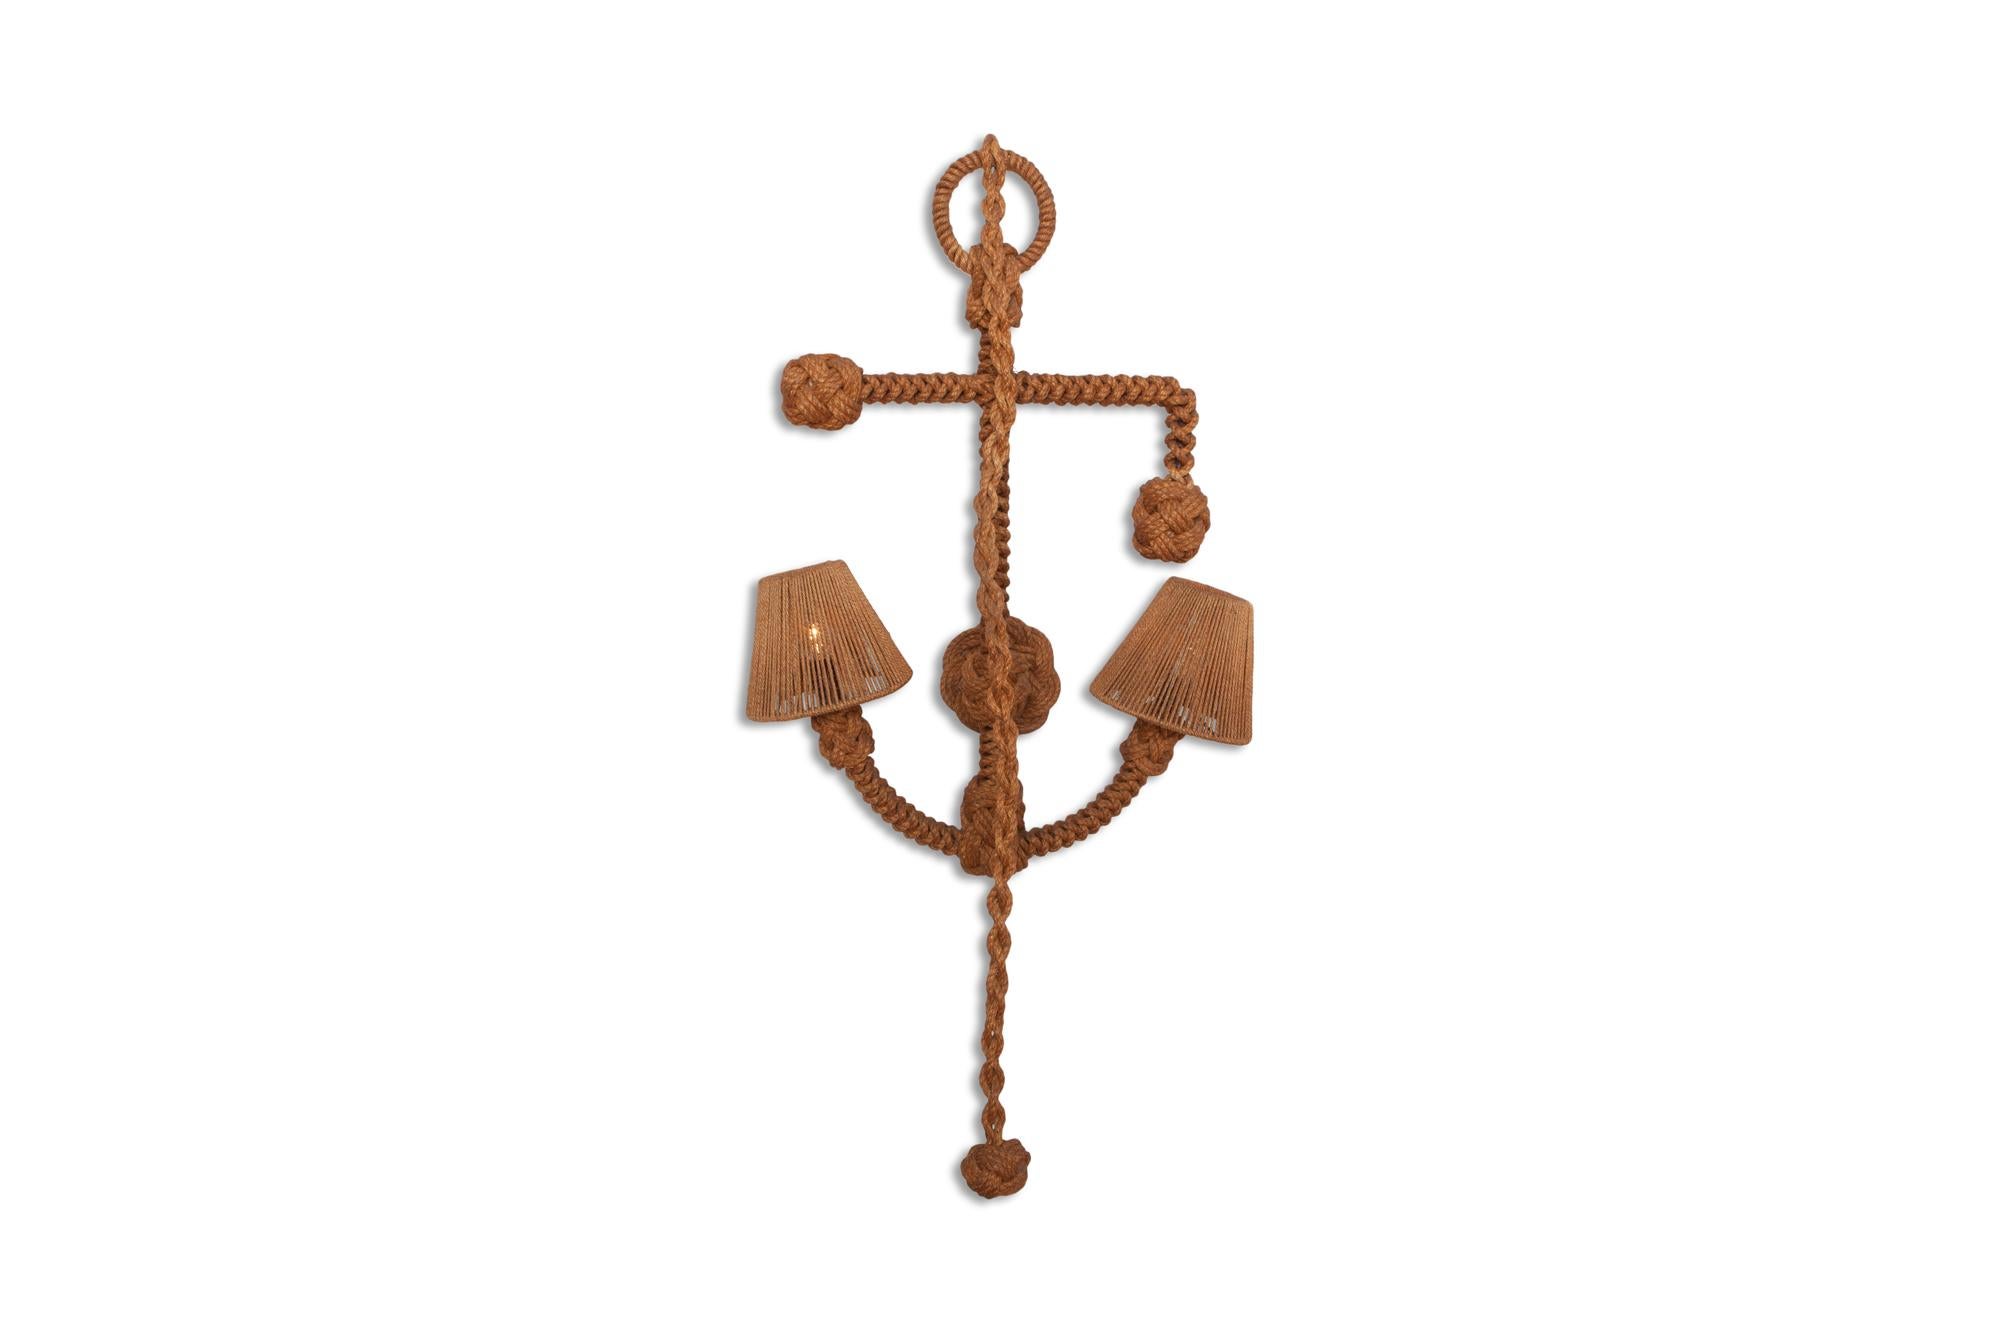 Audoux Minet 'Anchor' Rope Sconce 1